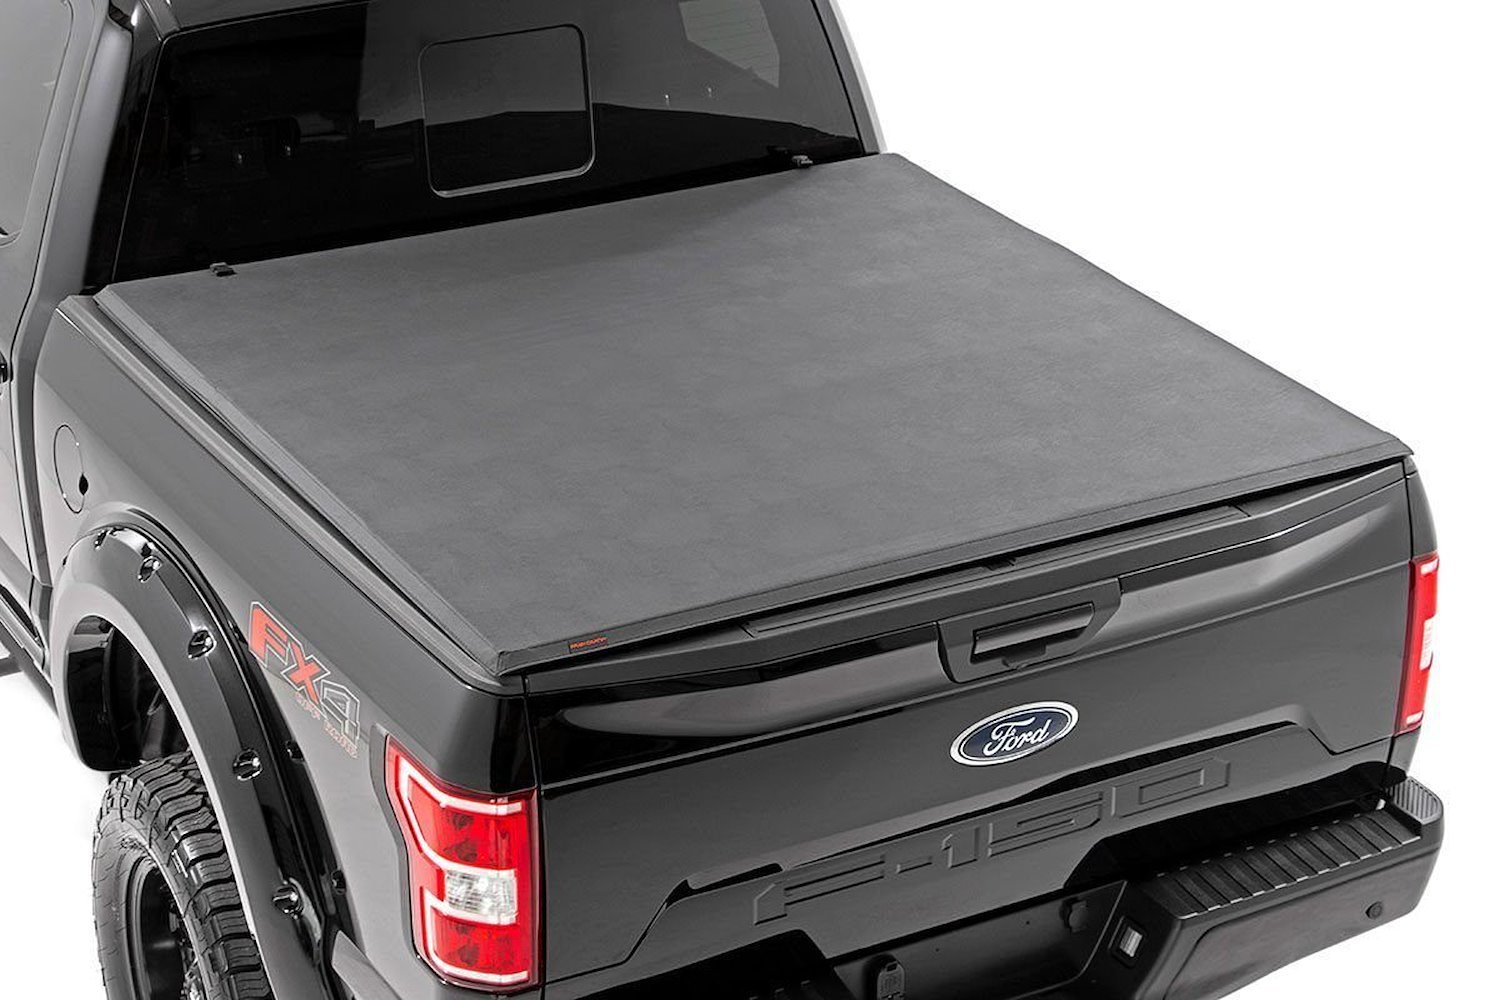 RC46219600 Ford Soft Tri-Fold Bed Cover (19-20 Ranger - 6' Bed)